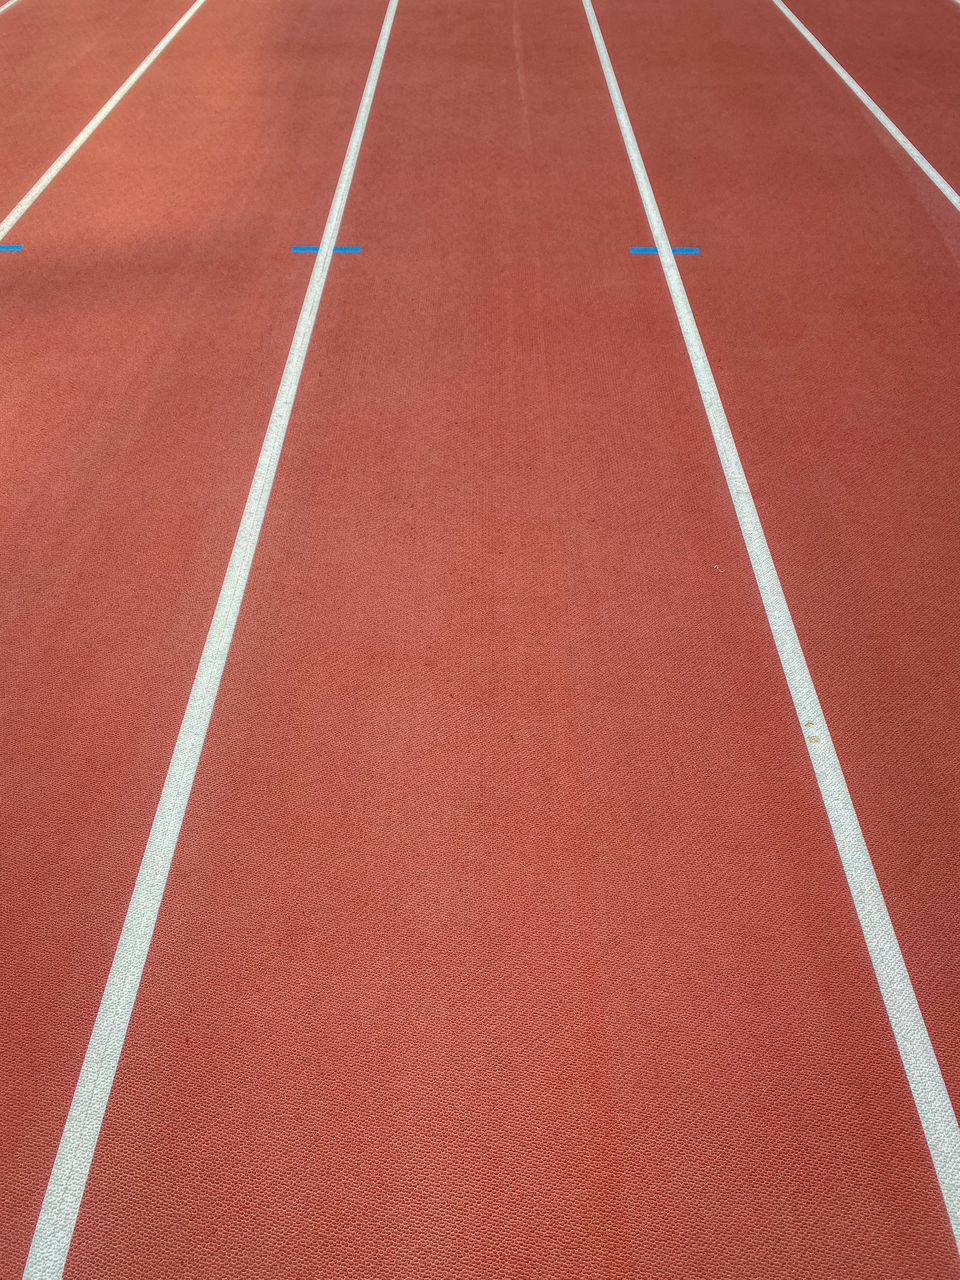 Lane on a red athletics track with white lines and blue marks